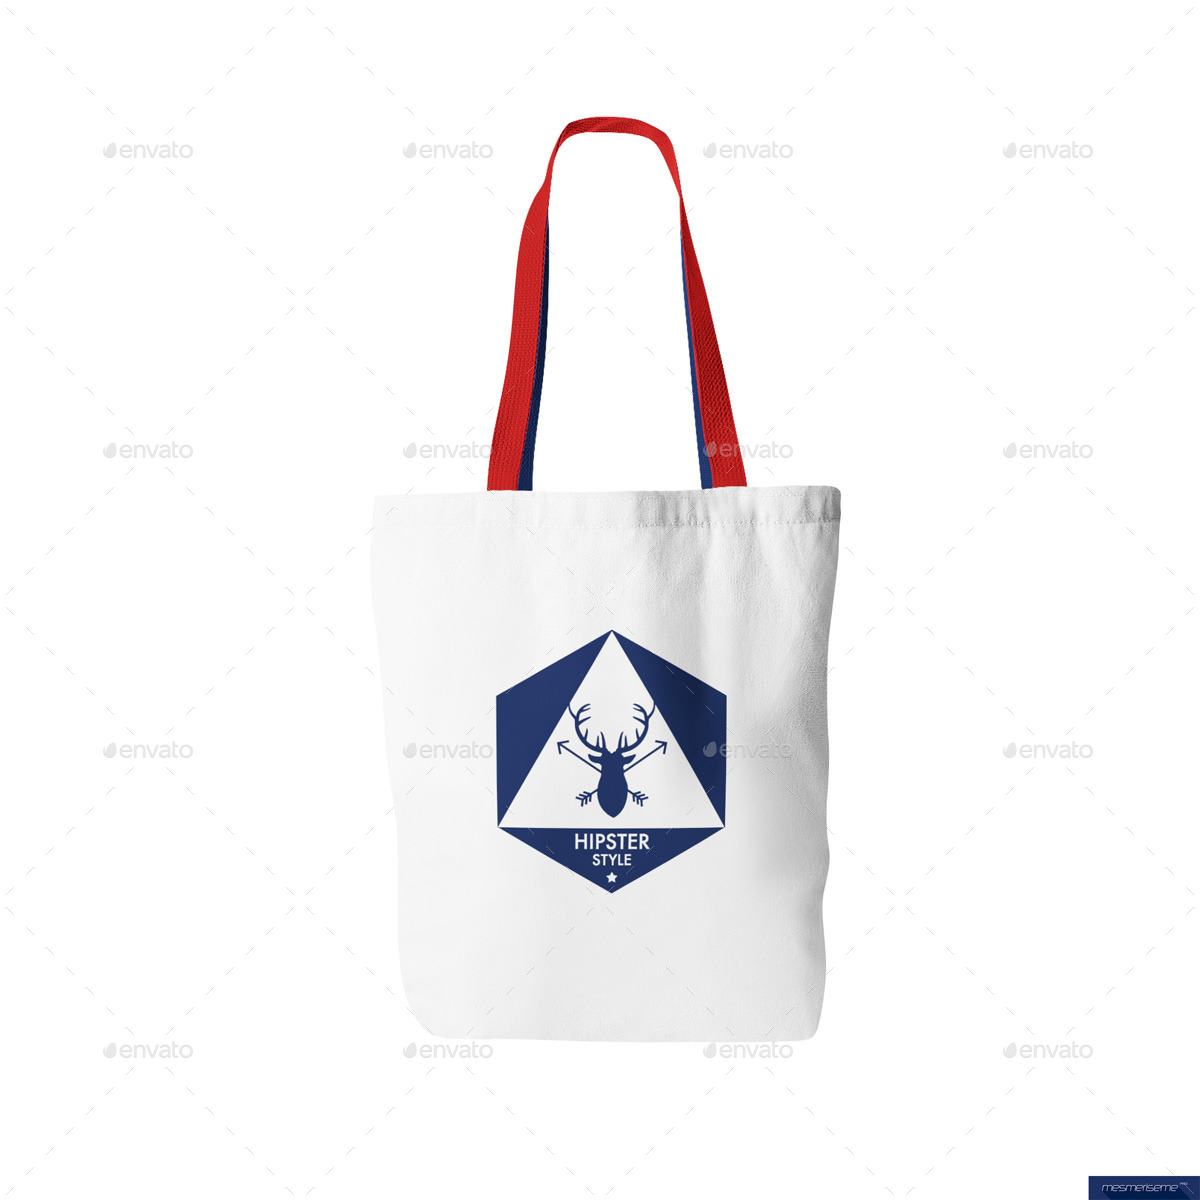 Download Tote Bag Mock-up by mesmeriseme_pro | GraphicRiver